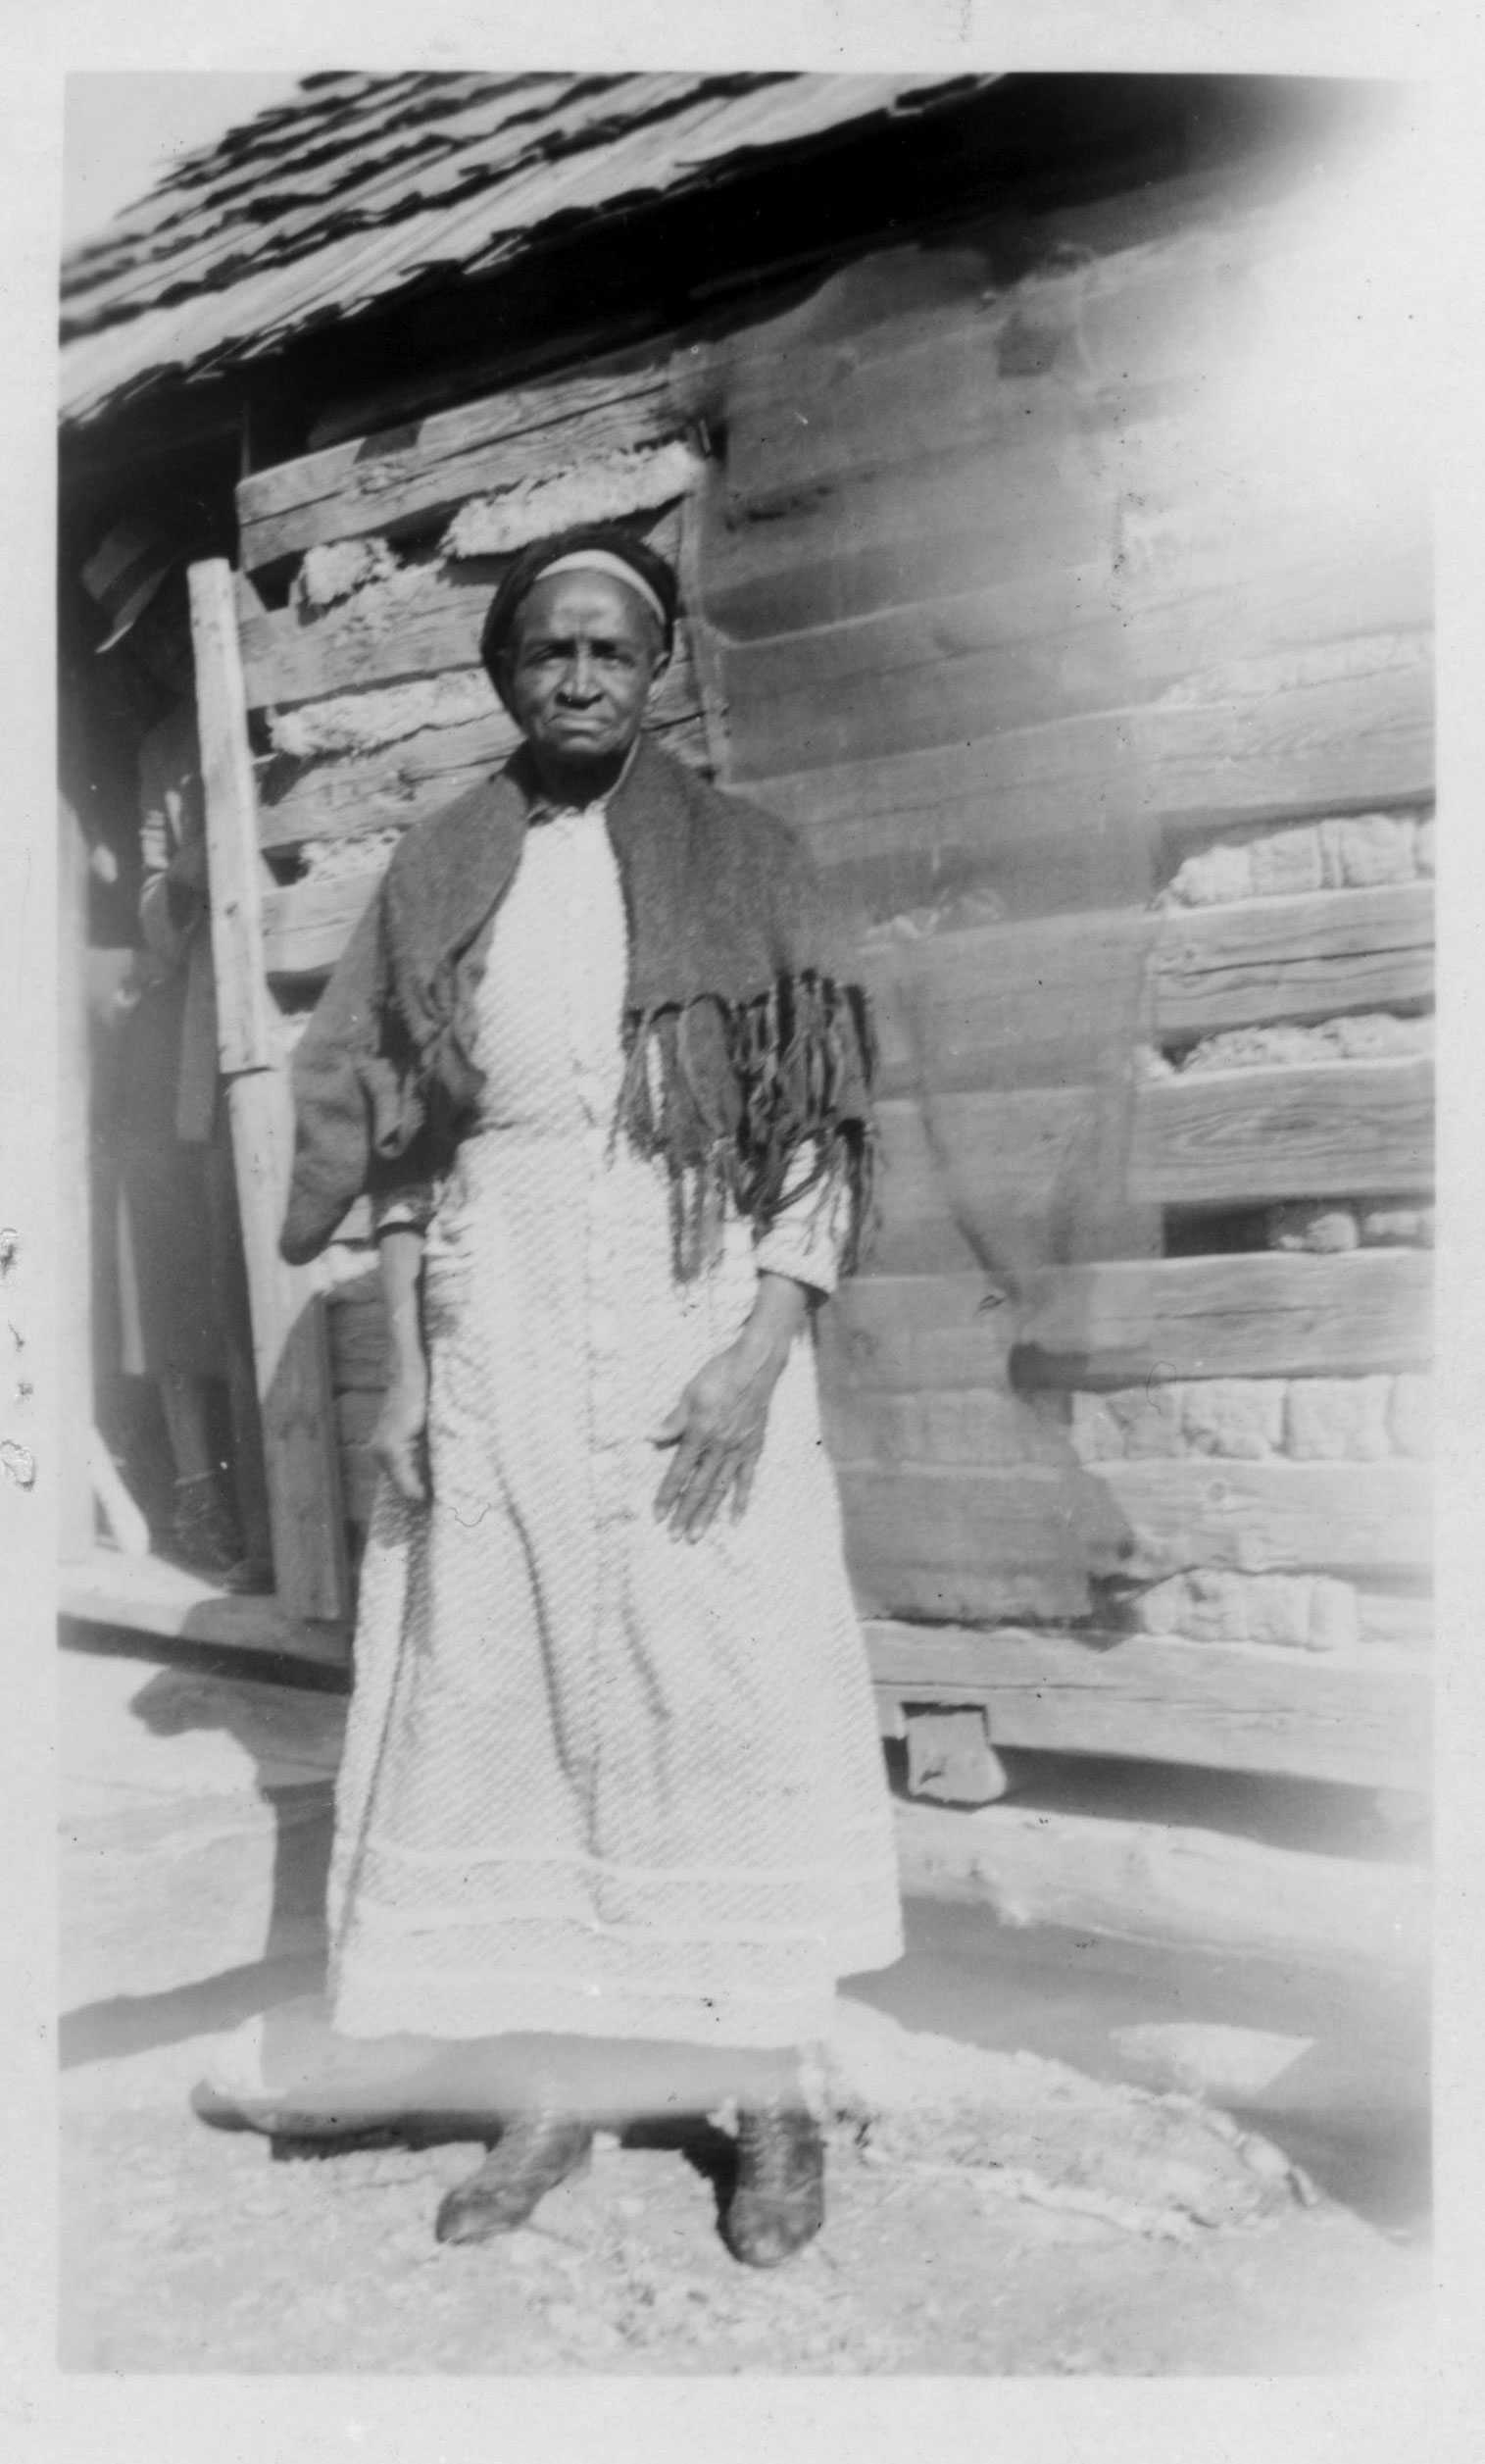 An overexposed black and white photograph of Lucy Thomas standing in front of a log cabin.